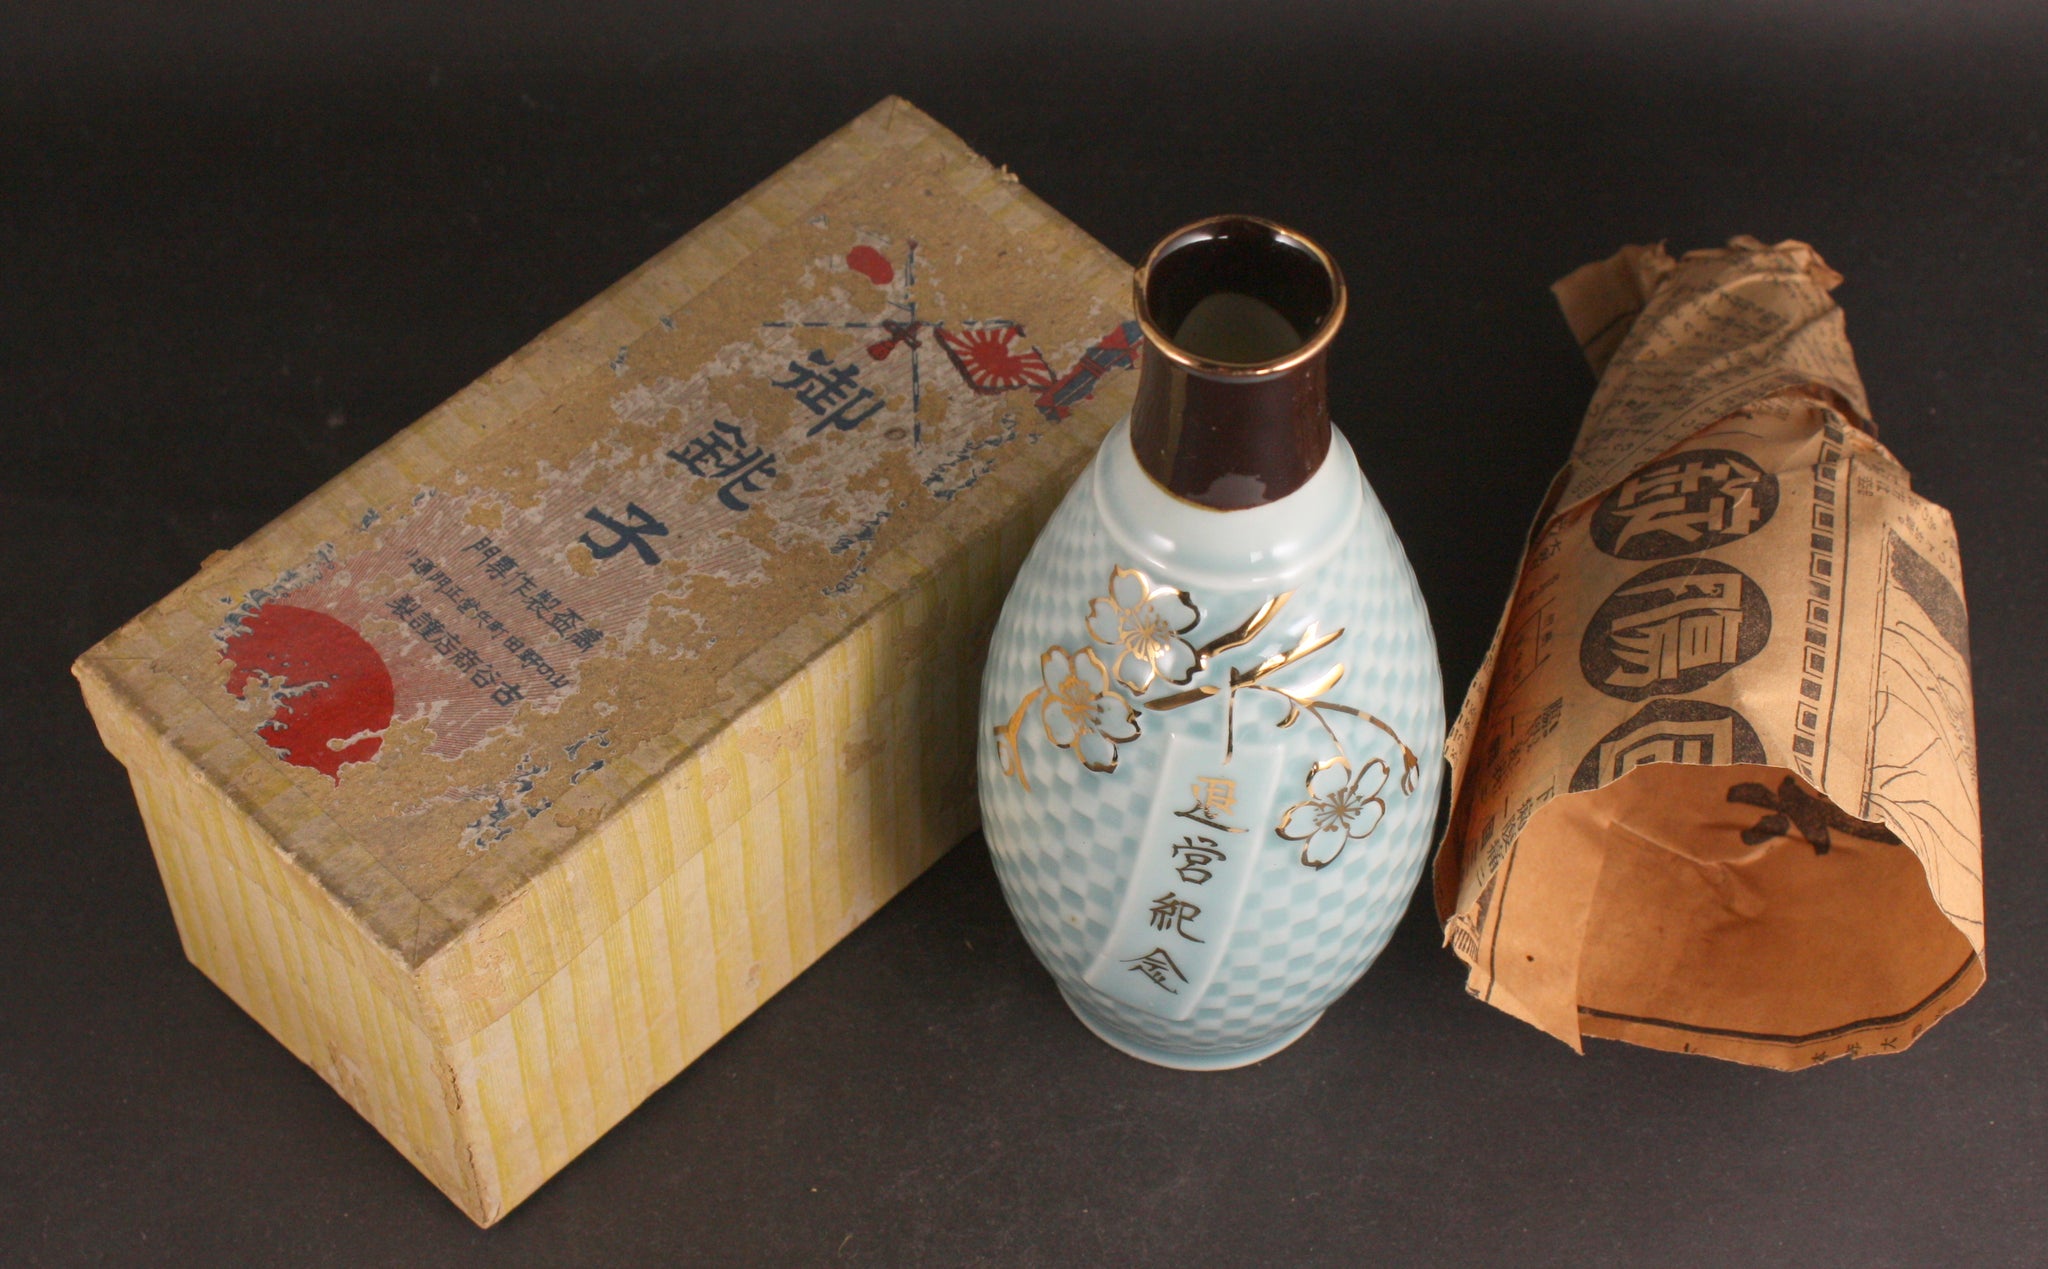 Boxed Antique Japanese Military Infantry Blossoms Army Sake Bottle